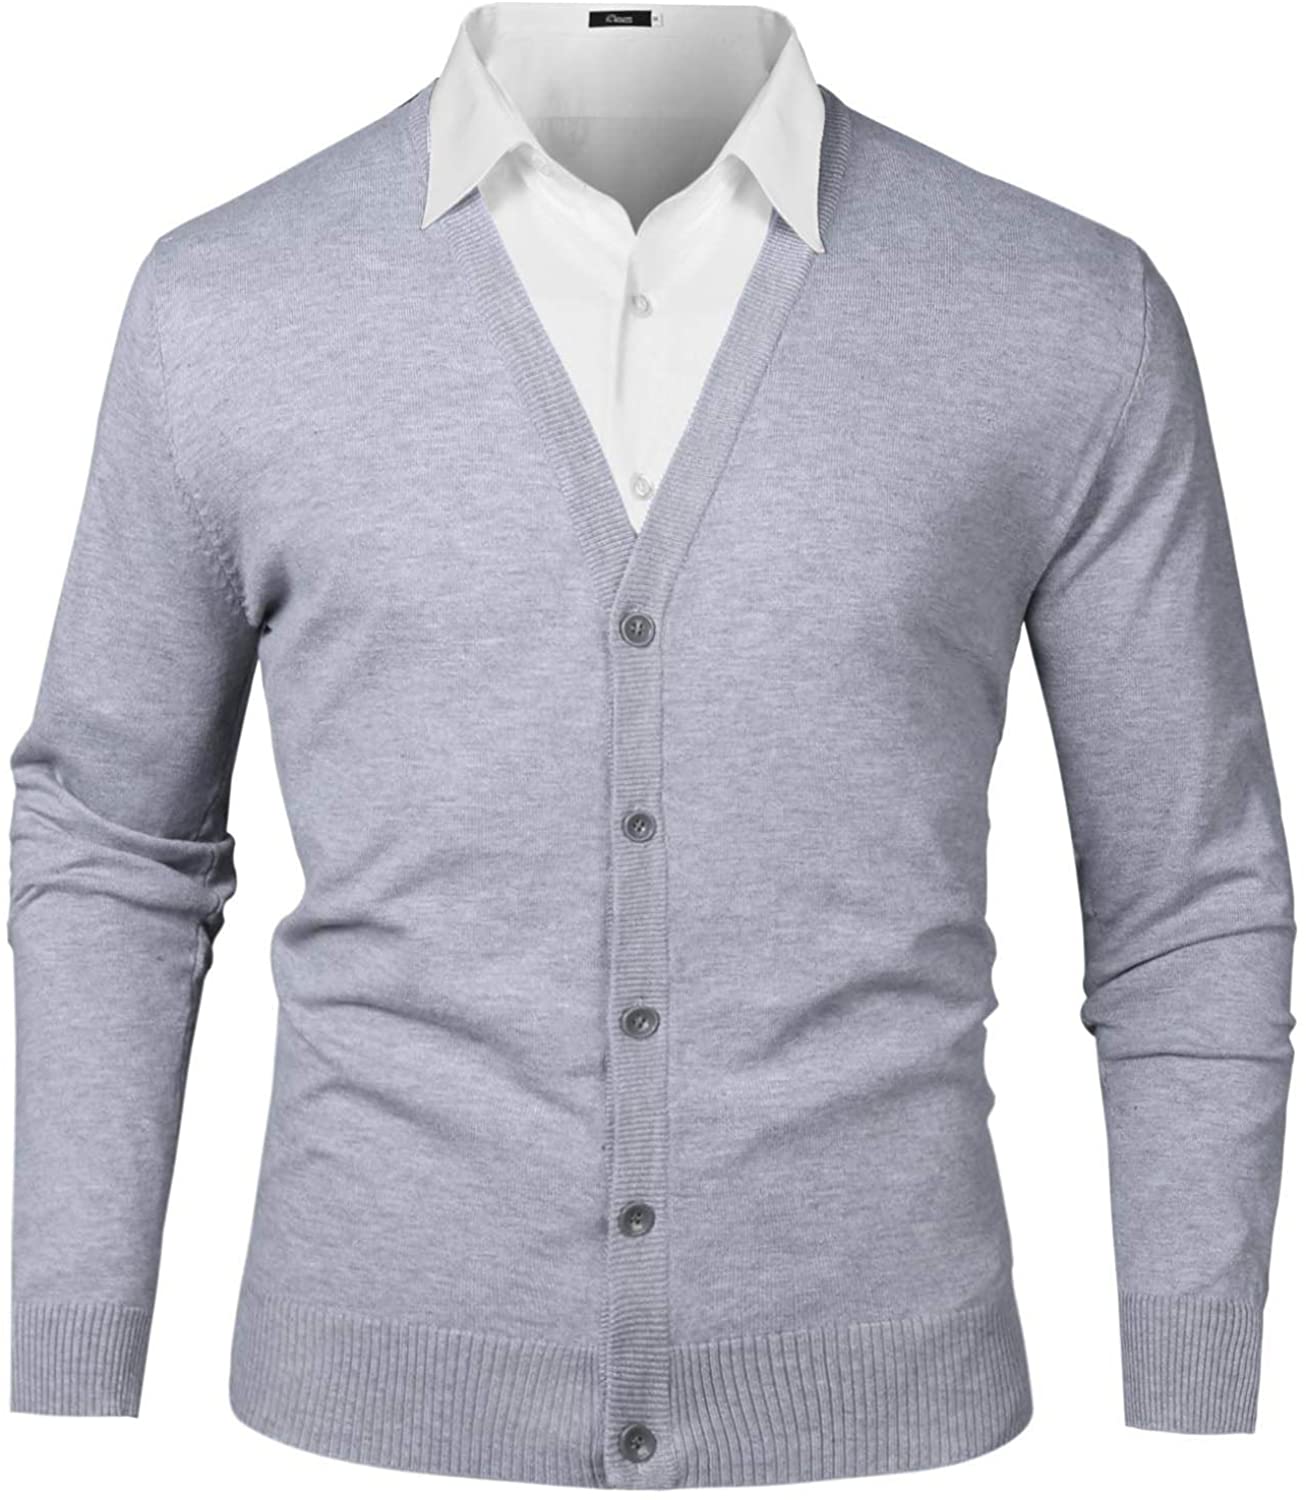 APRAW Mens Casual Slim Fit Soft Cotton V-Neck Button Down Lightweight Knitted Cardigan Sweater